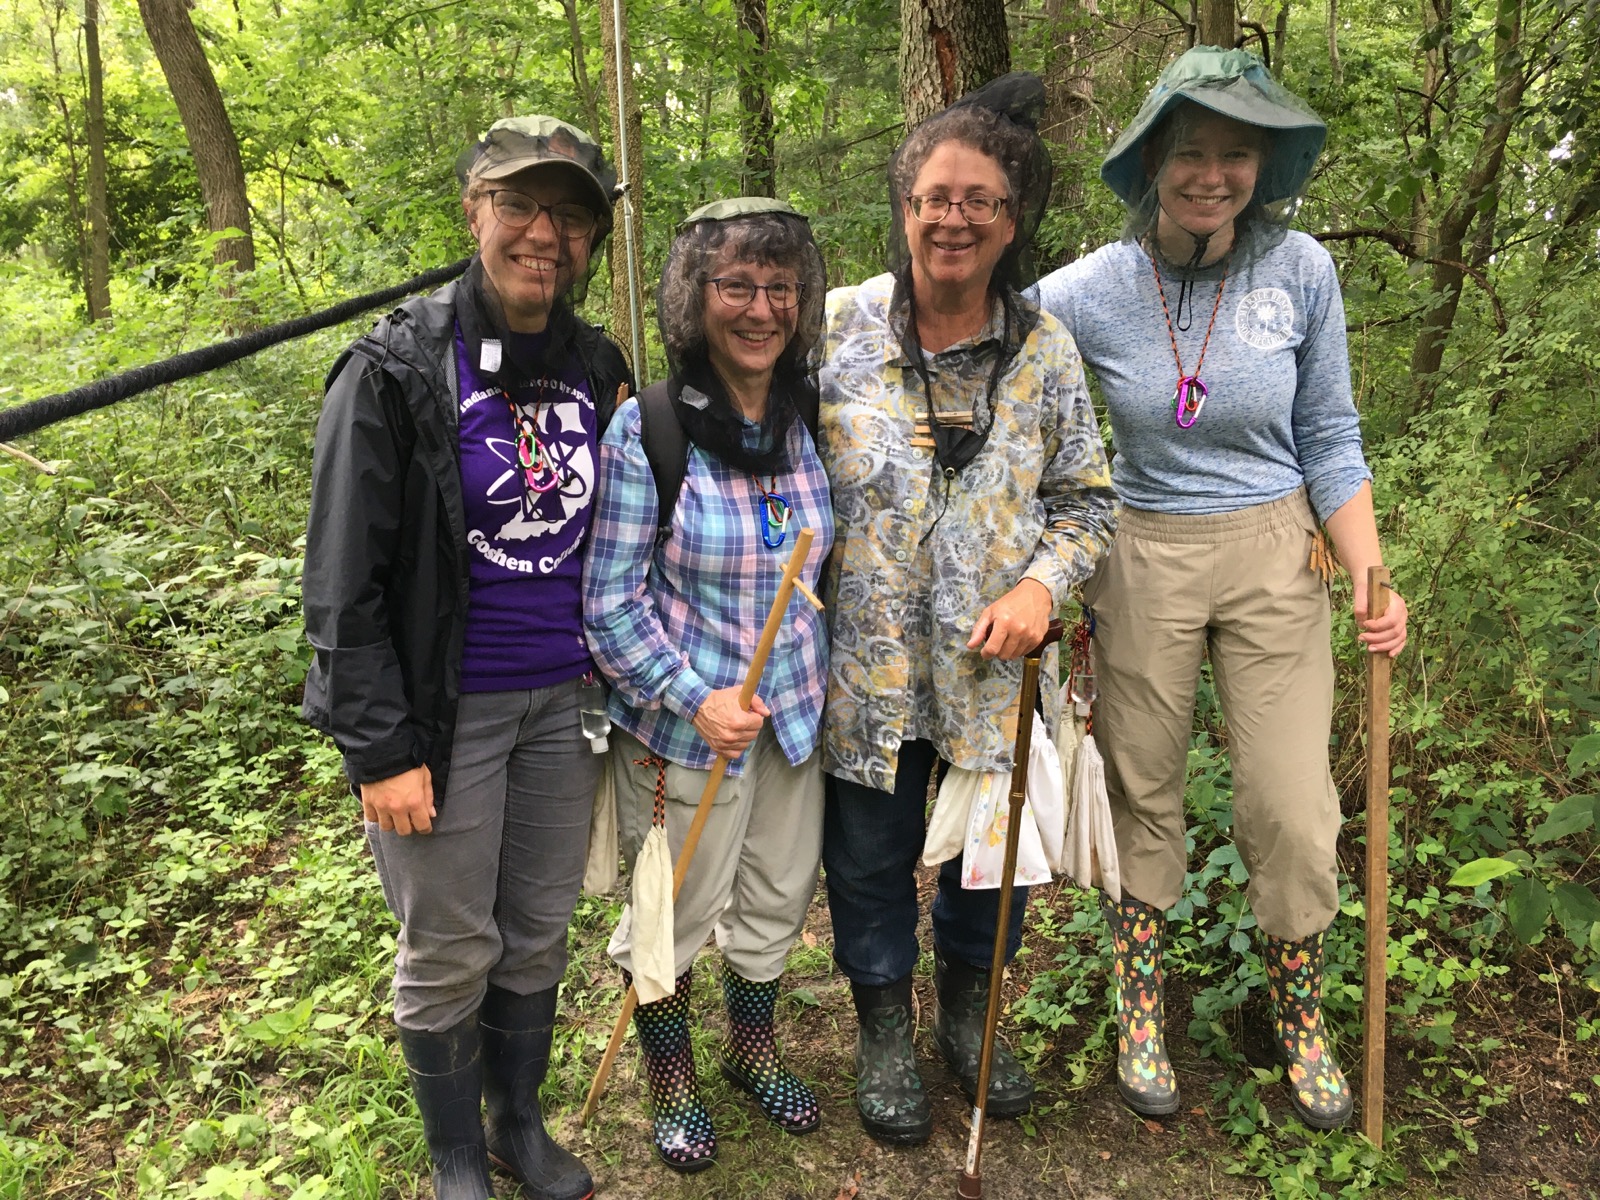 Bird banding volunteers and Hickory Scholar students for summer 2021. Left to right: Ruby, Lois Oyer, Julie Davidson and Mira.